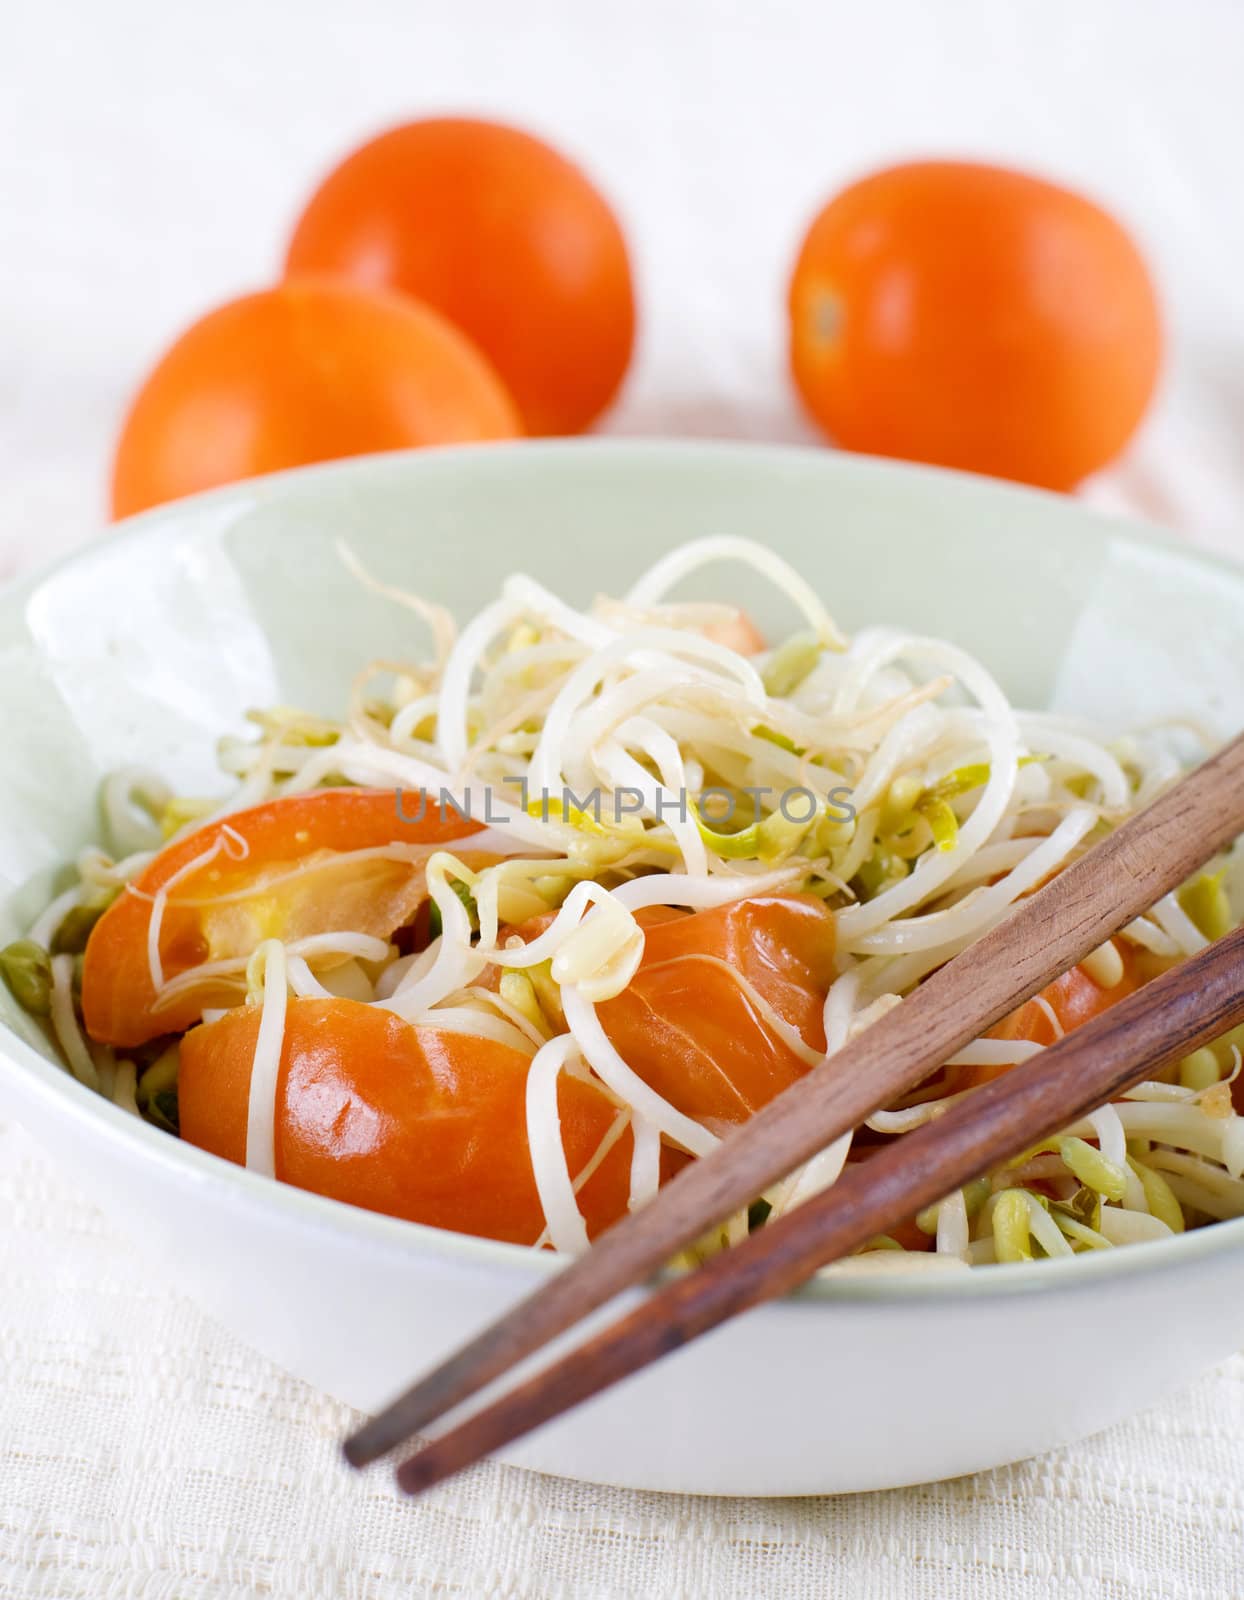 Bean sprouts. by szefei